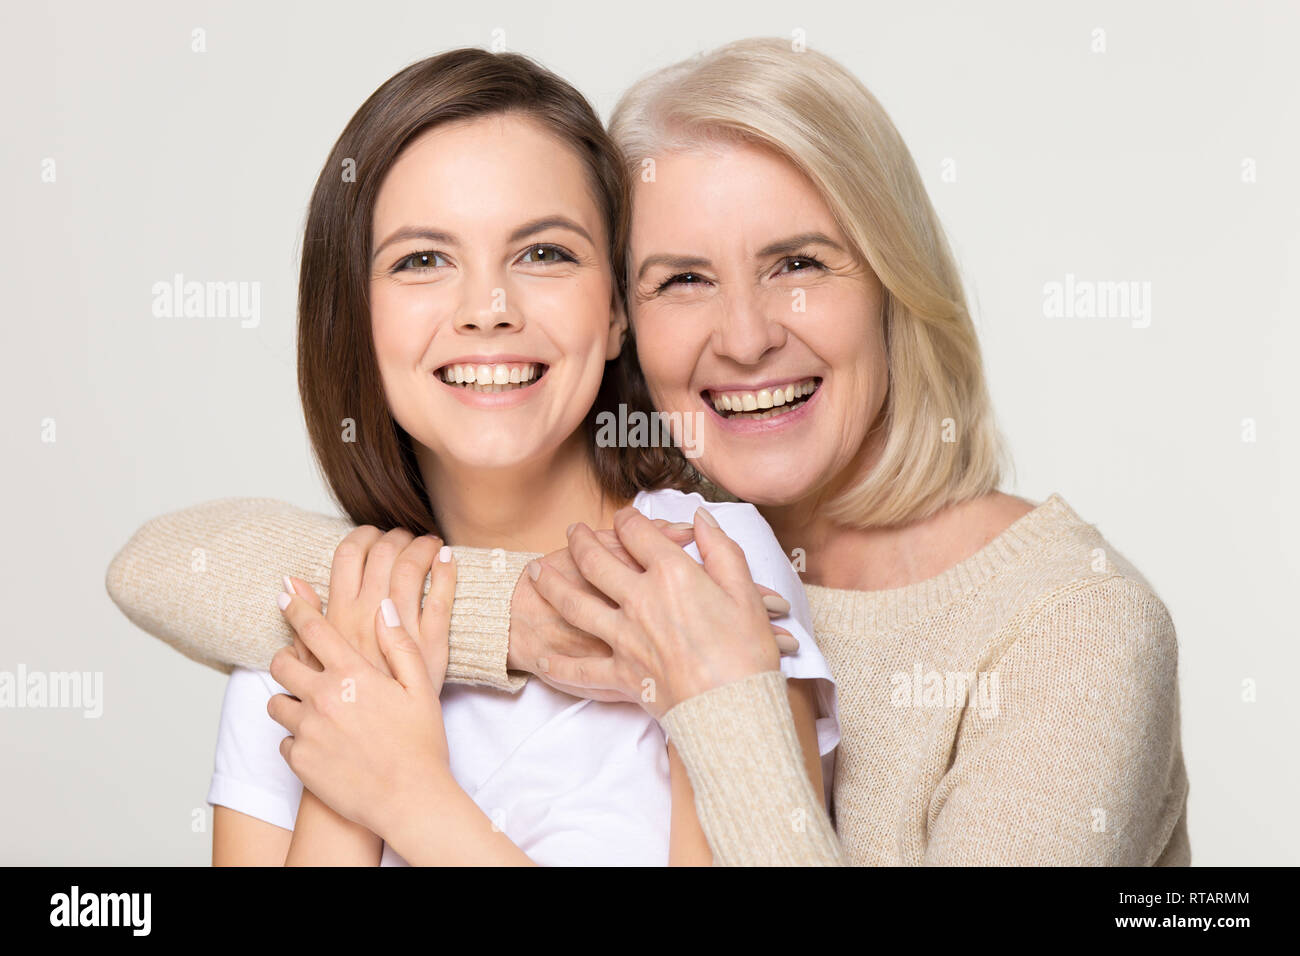 Happy old mother embracing young daughter isolated on background Stock Photo